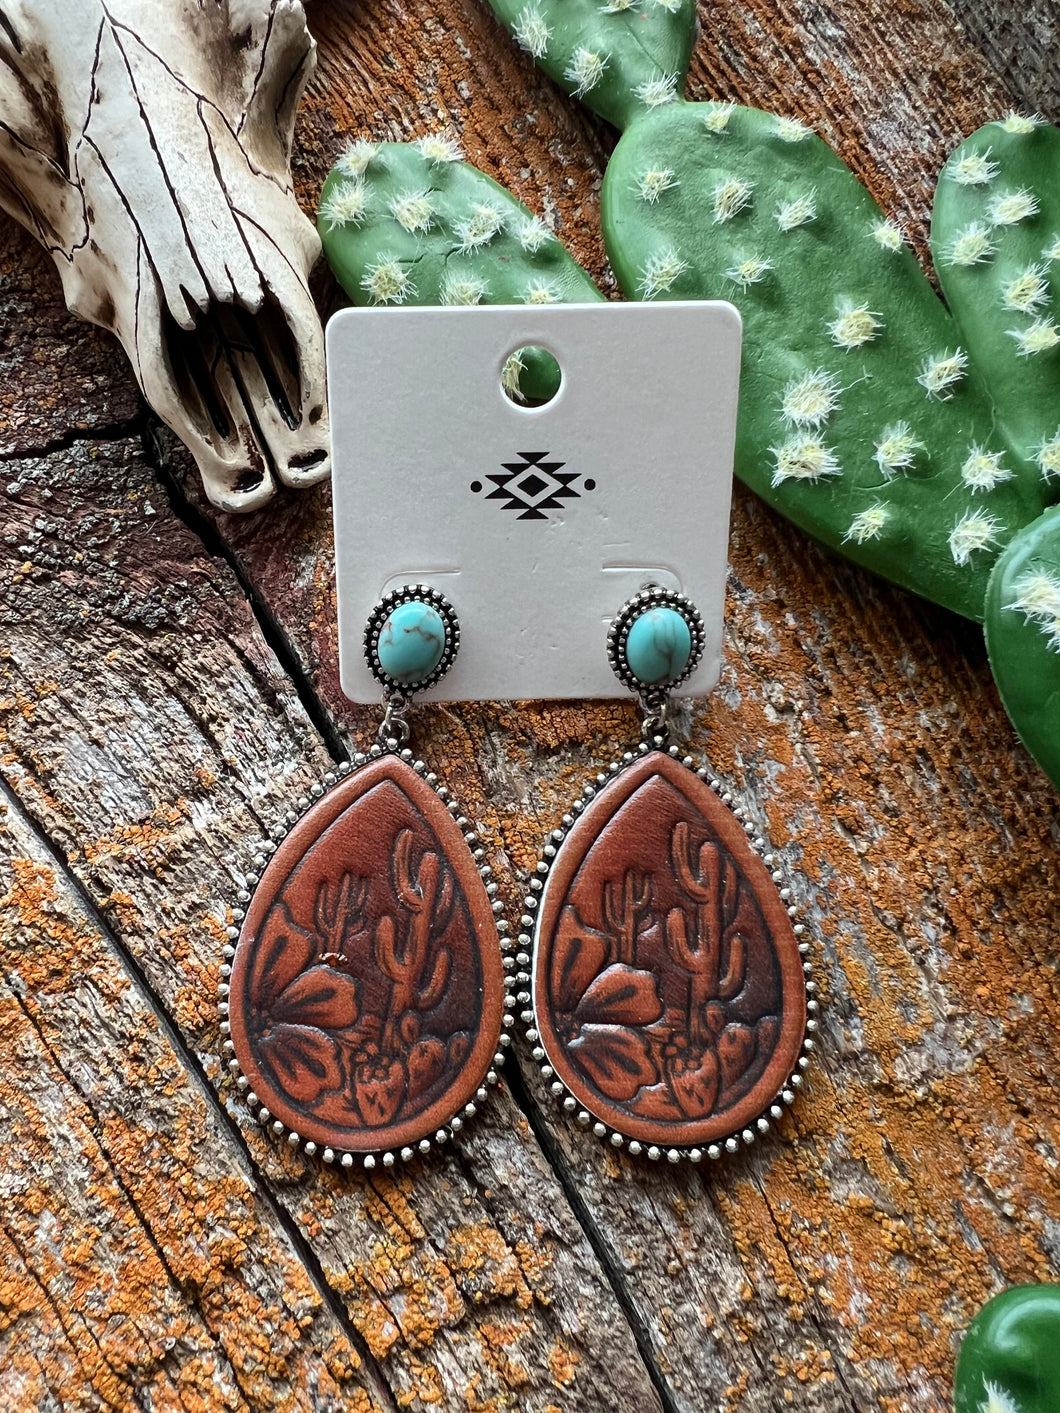 Turquoise flower/ cactus leather earrings